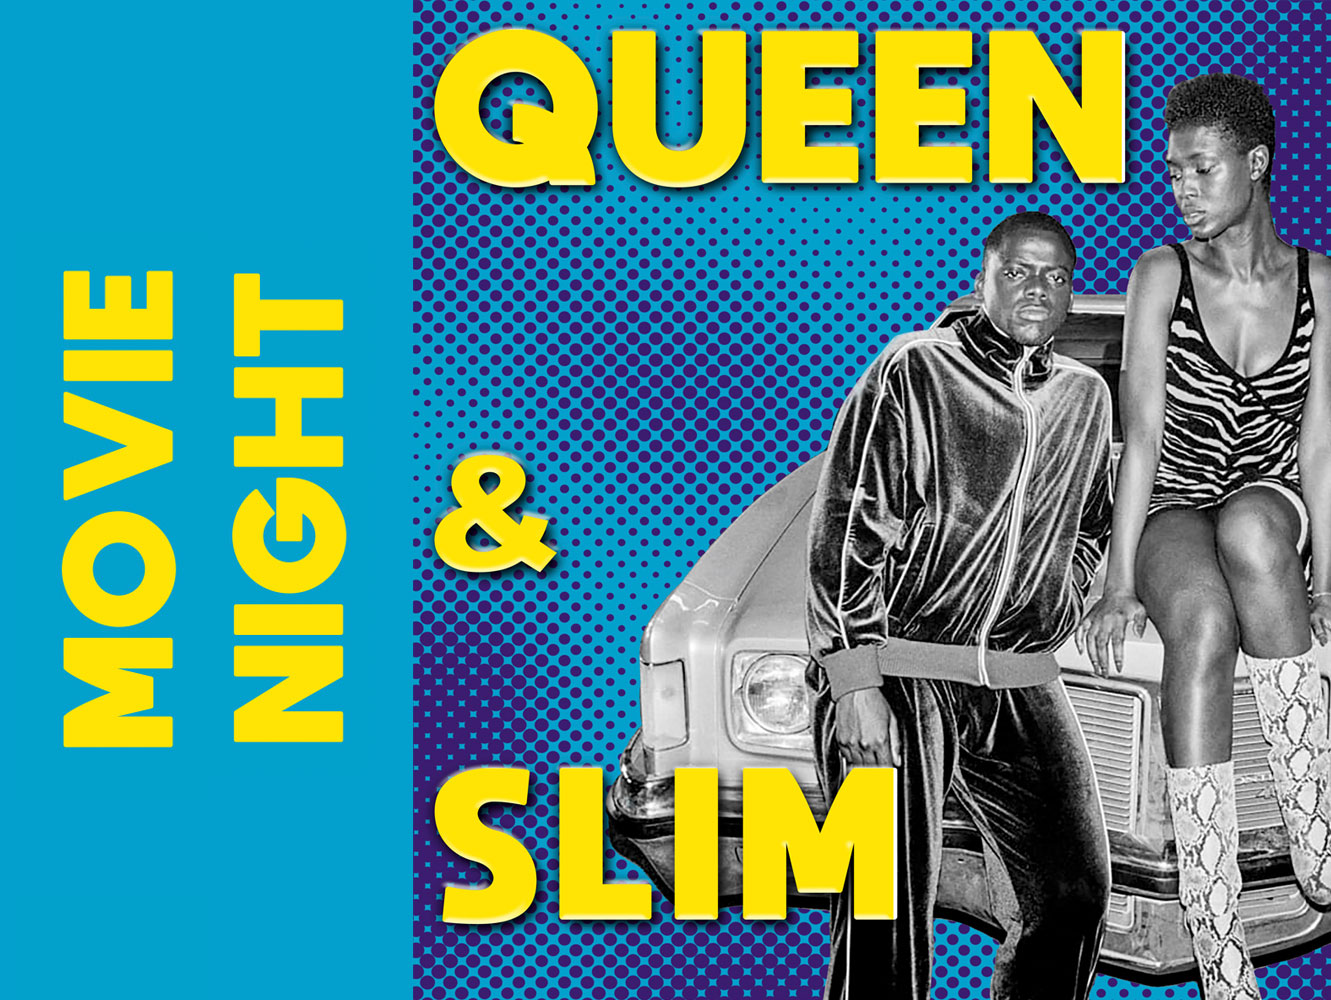 Queen and Slim movie night promotion